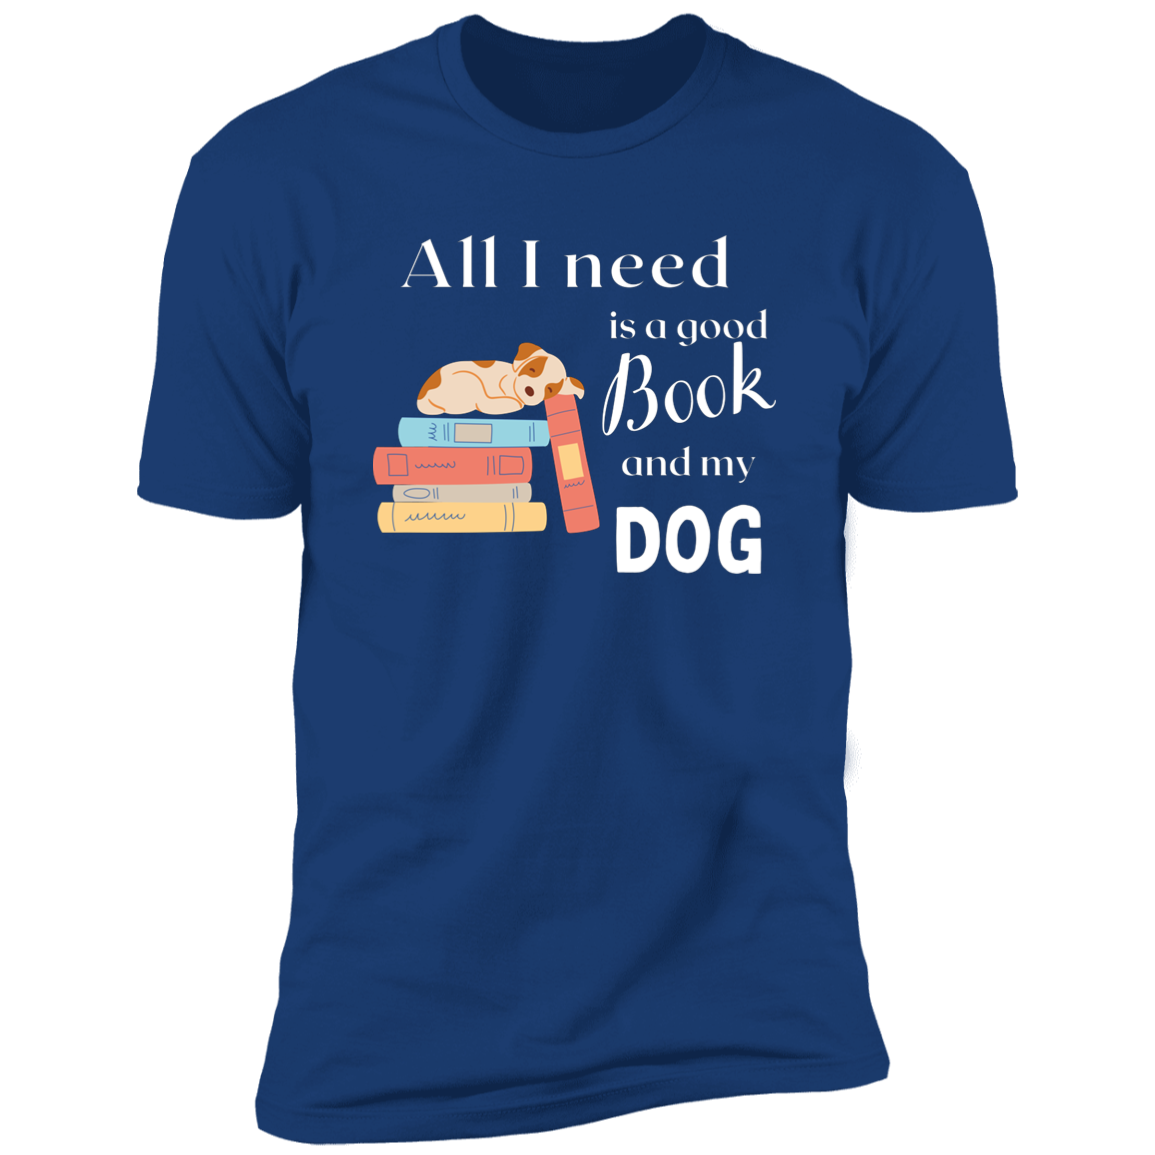 All I Need is a Good Book and My Dog, dog t-shirt for humans, in royal blue